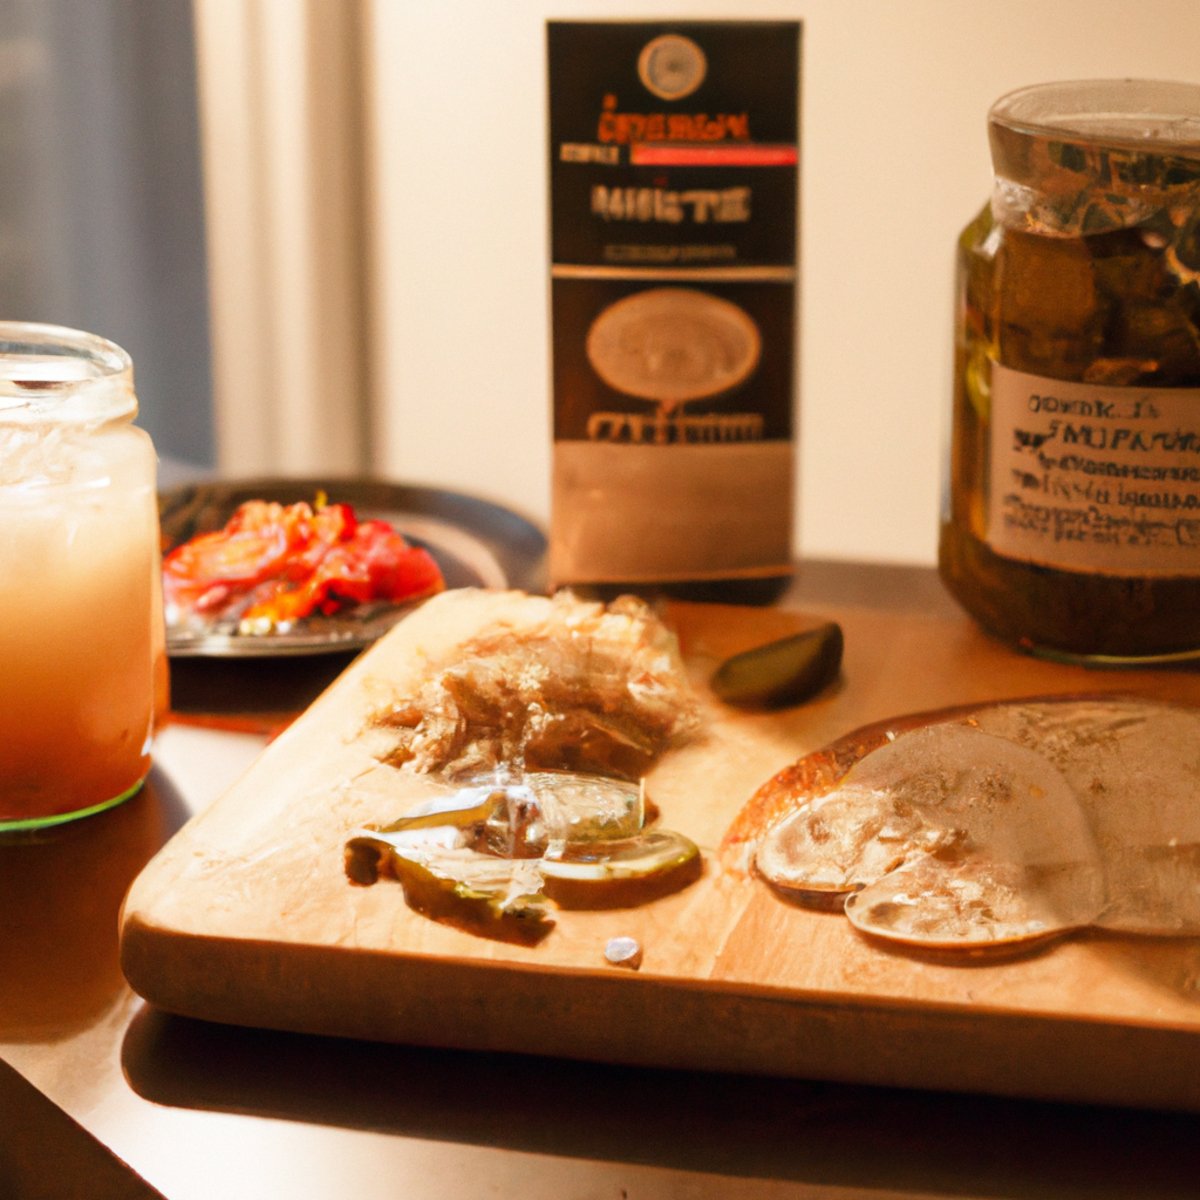 The photo depicts a wooden cutting board with various foods arranged on it, including yogurt, sauerkraut, kimchi, and pickles. A glass jar of kombucha sits next to the board. The foods are arranged in a way that highlights their probiotic content, with labels indicating the specific strains of bacteria present in each. The lighting is warm and natural, giving the photo a cozy, inviting feel.